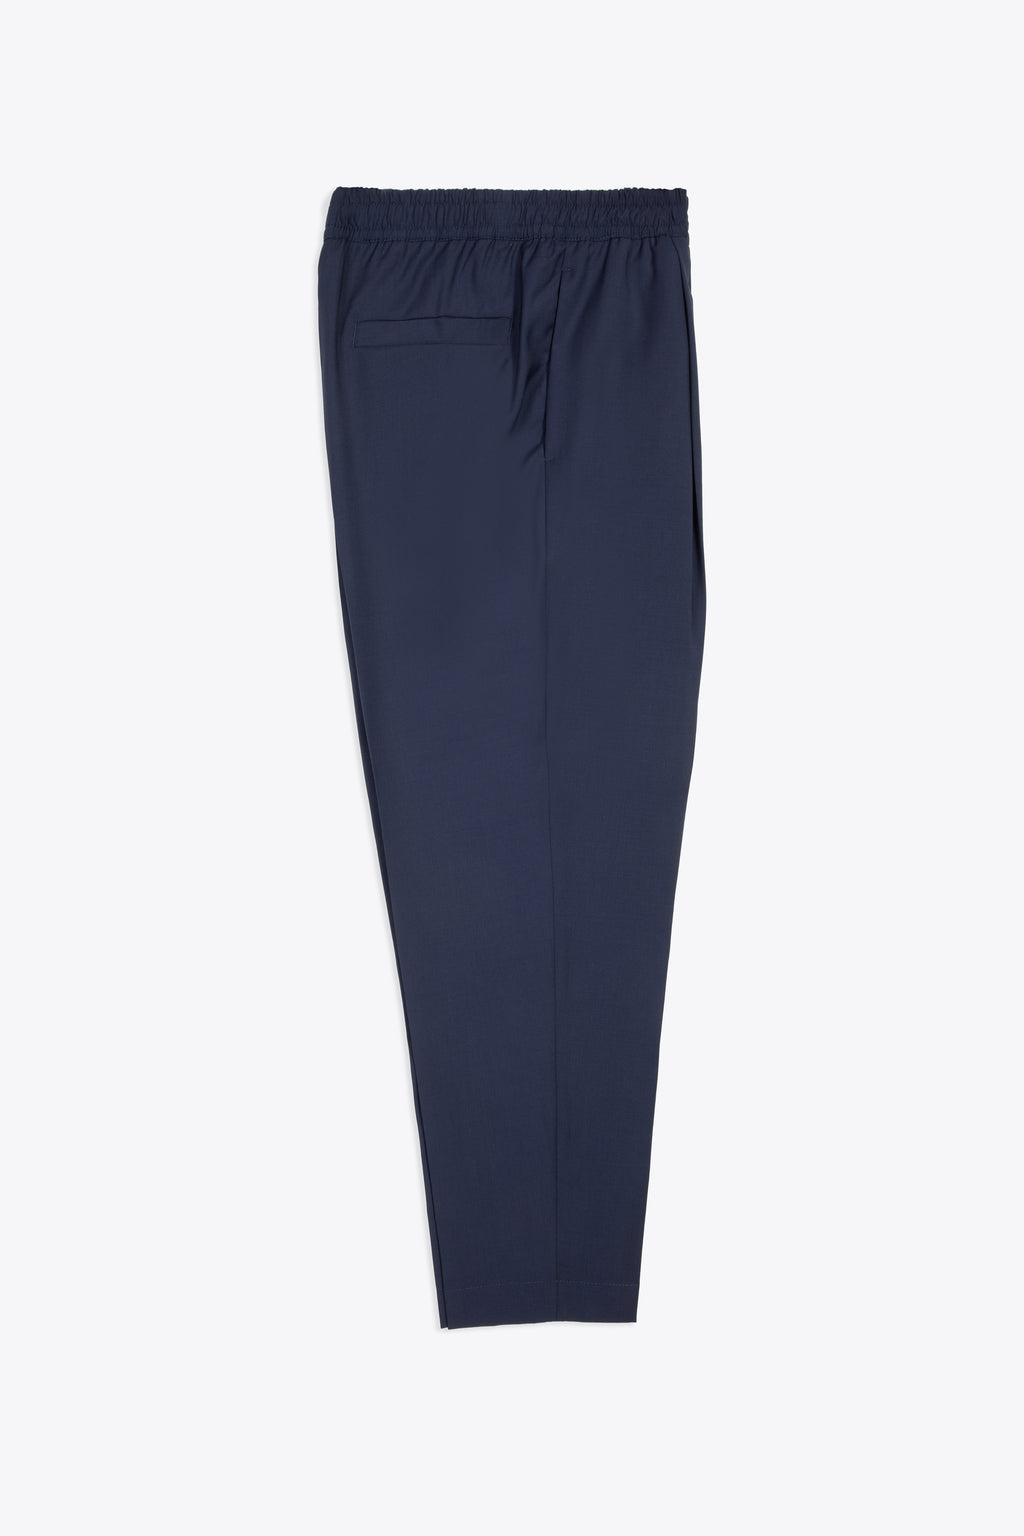 alt-image__Blue-wool-tailored-pant-with-elastic-waistband---Savoys